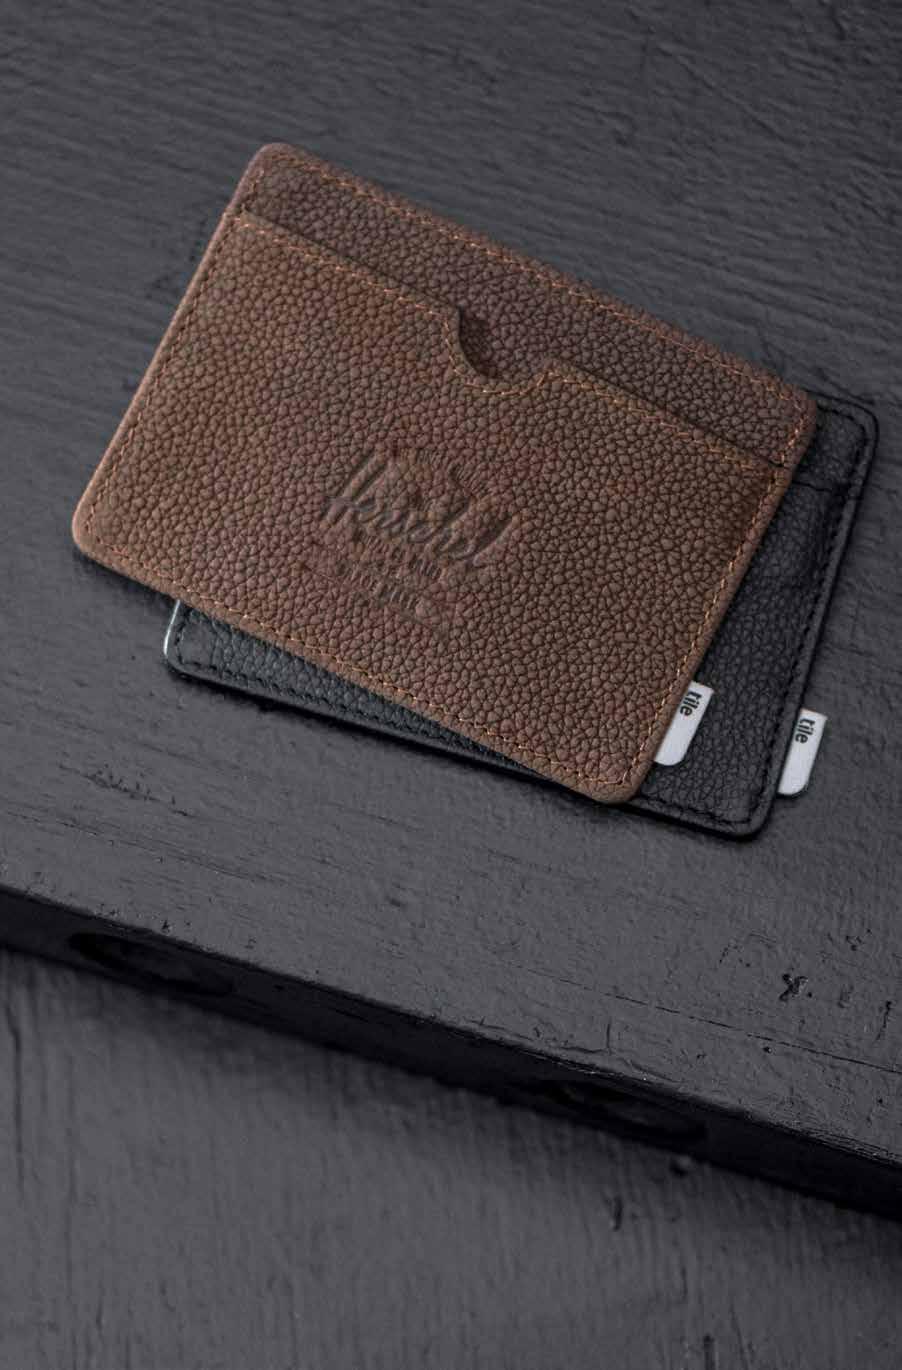 060 TILE - 10421 CHARLIE LEATHER Tile Slim Bluetooth tracker + + High quality textured